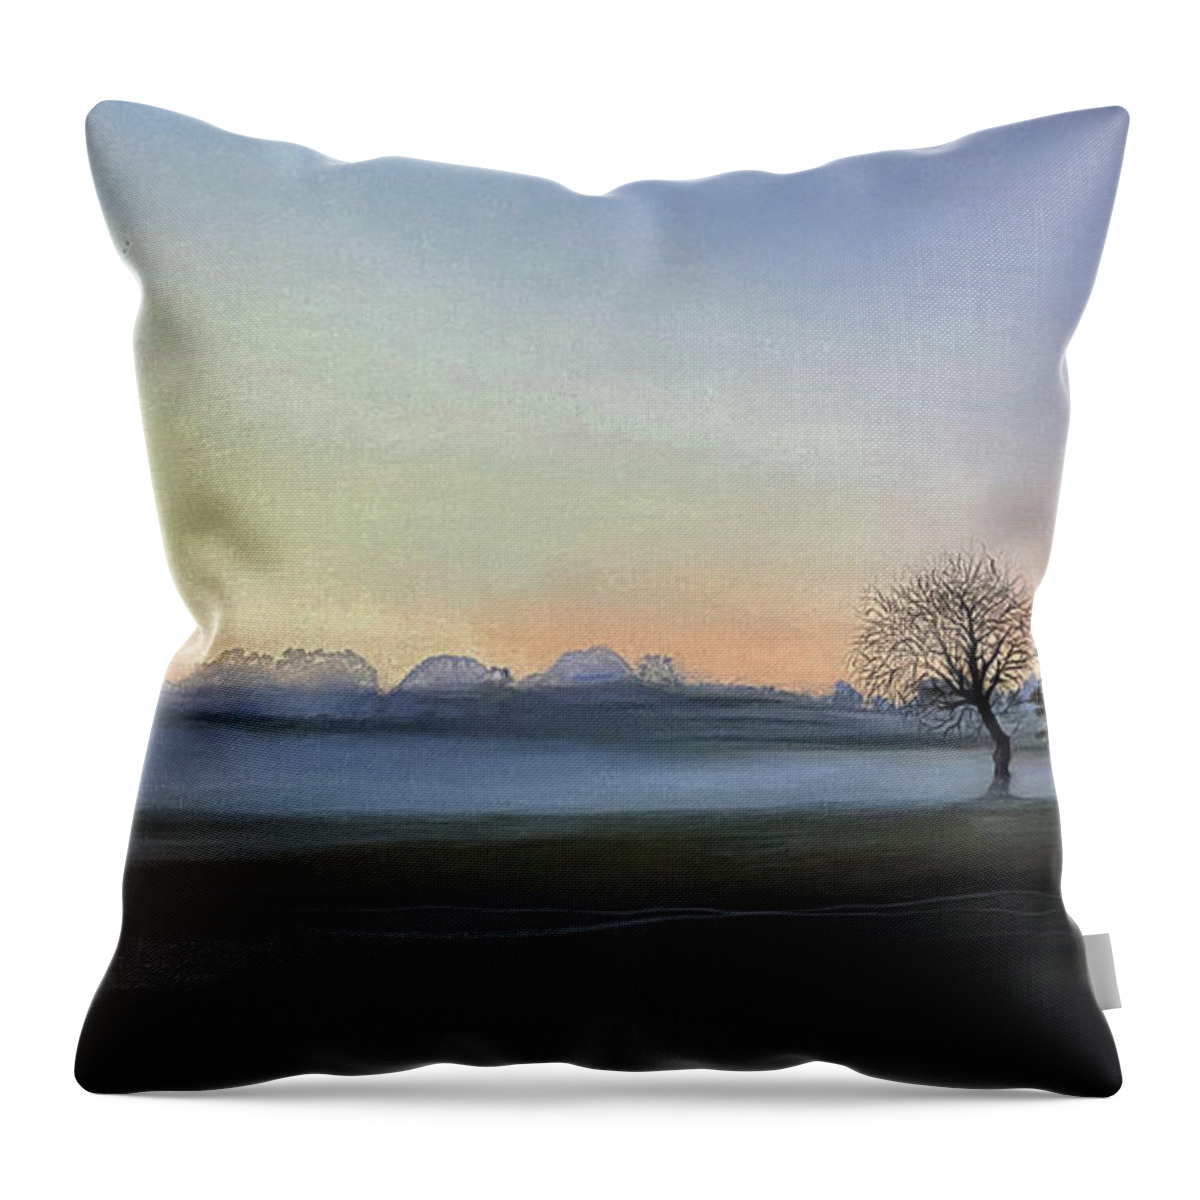 Art Throw Pillow featuring the painting Morning Mist Encounter by Carolyn Coffey Wallace